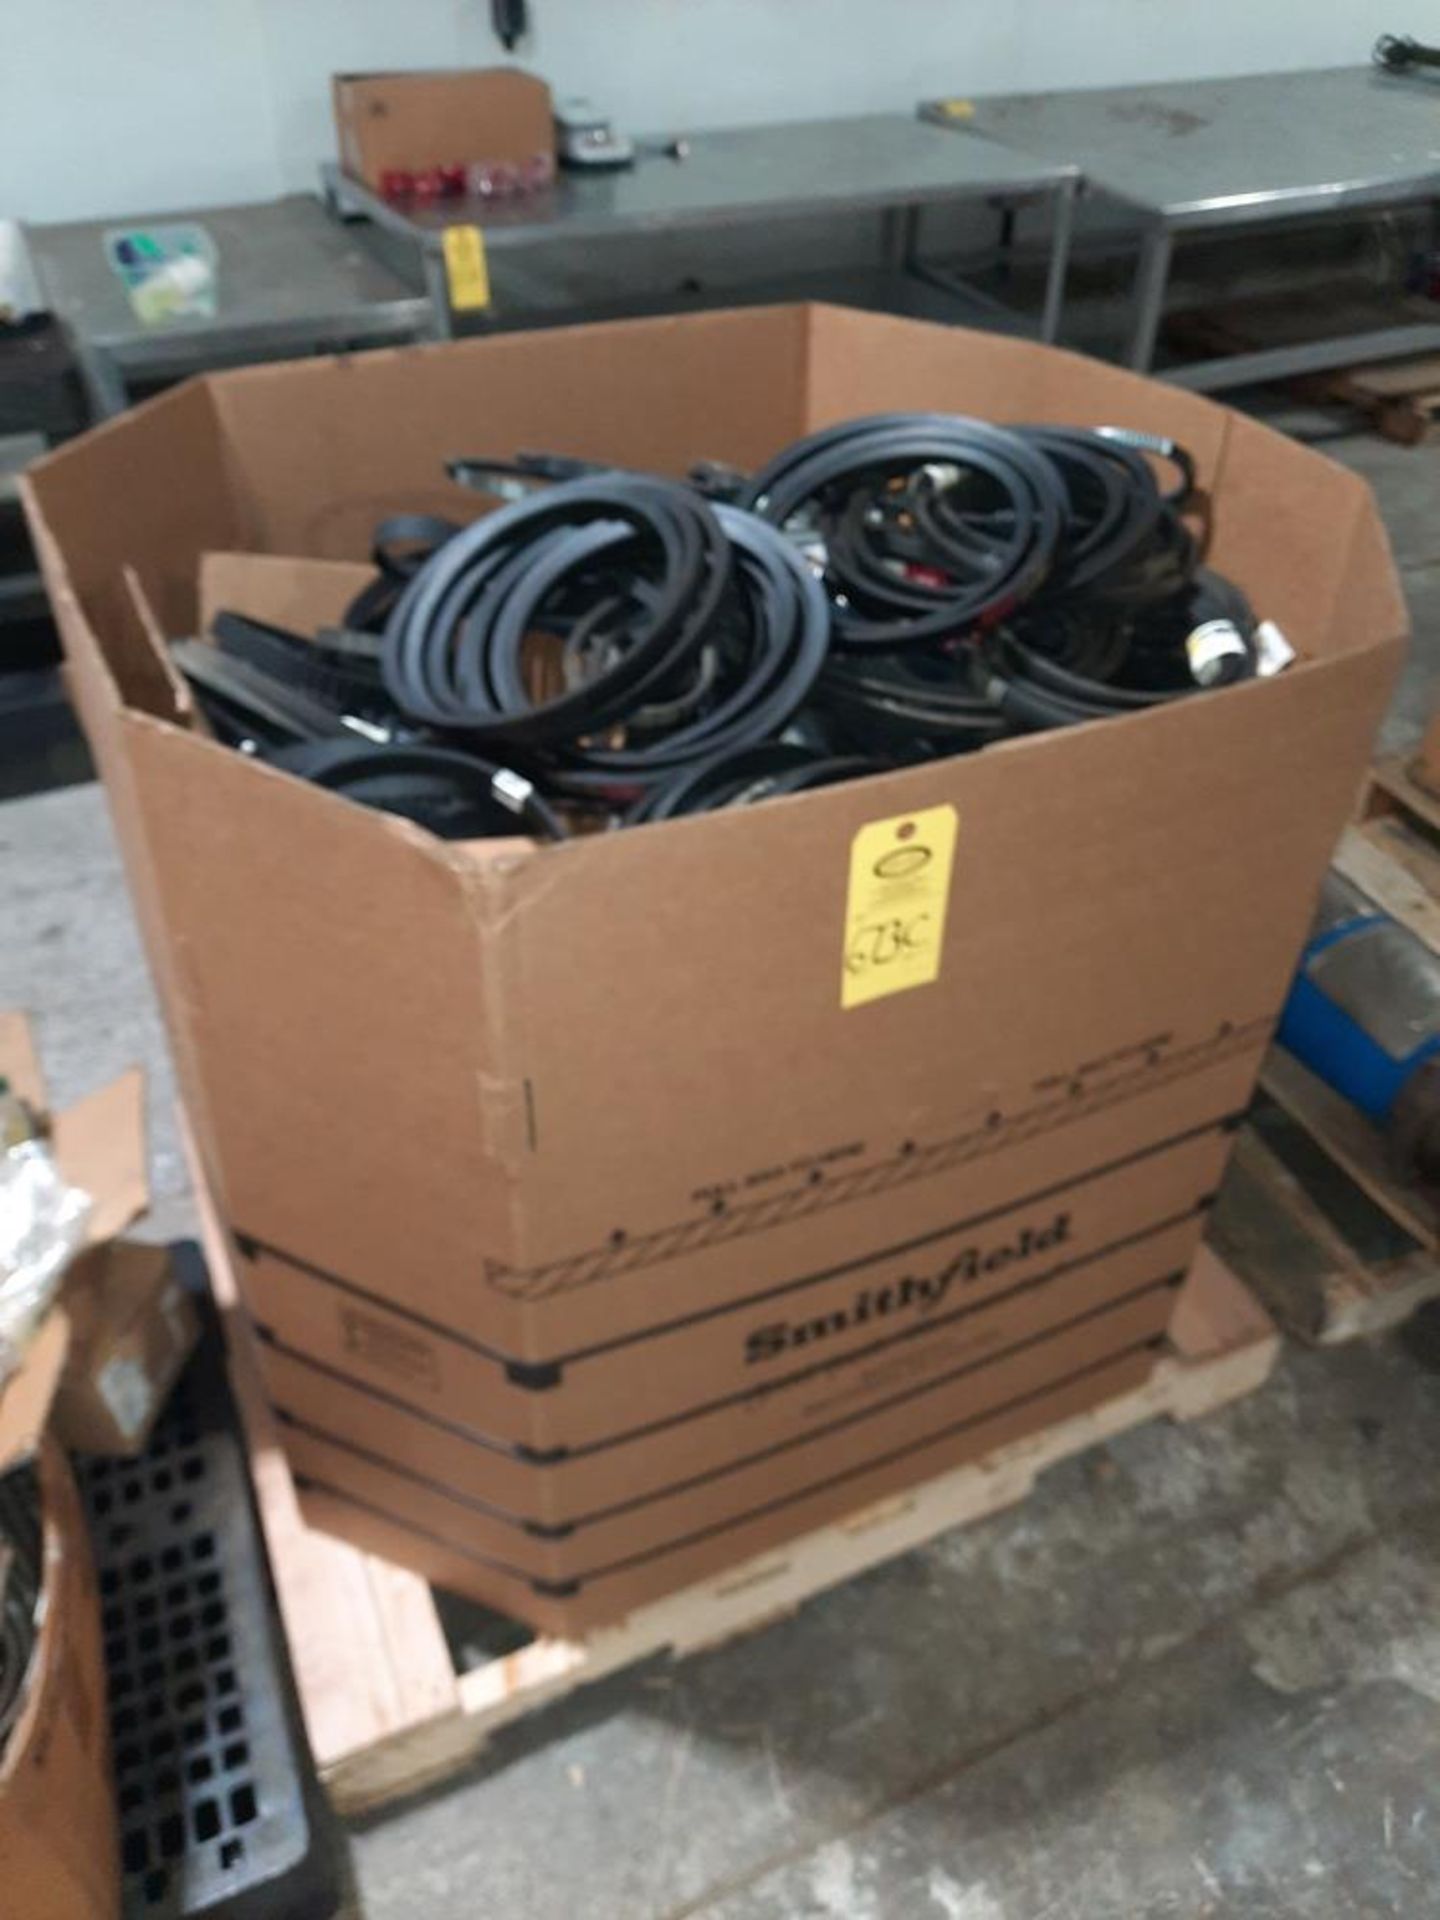 Lot Box of Timing Belts, V-Belts by Kaman, Gatos etc.: Required Loading Fee $50.00, Rigger-Norm